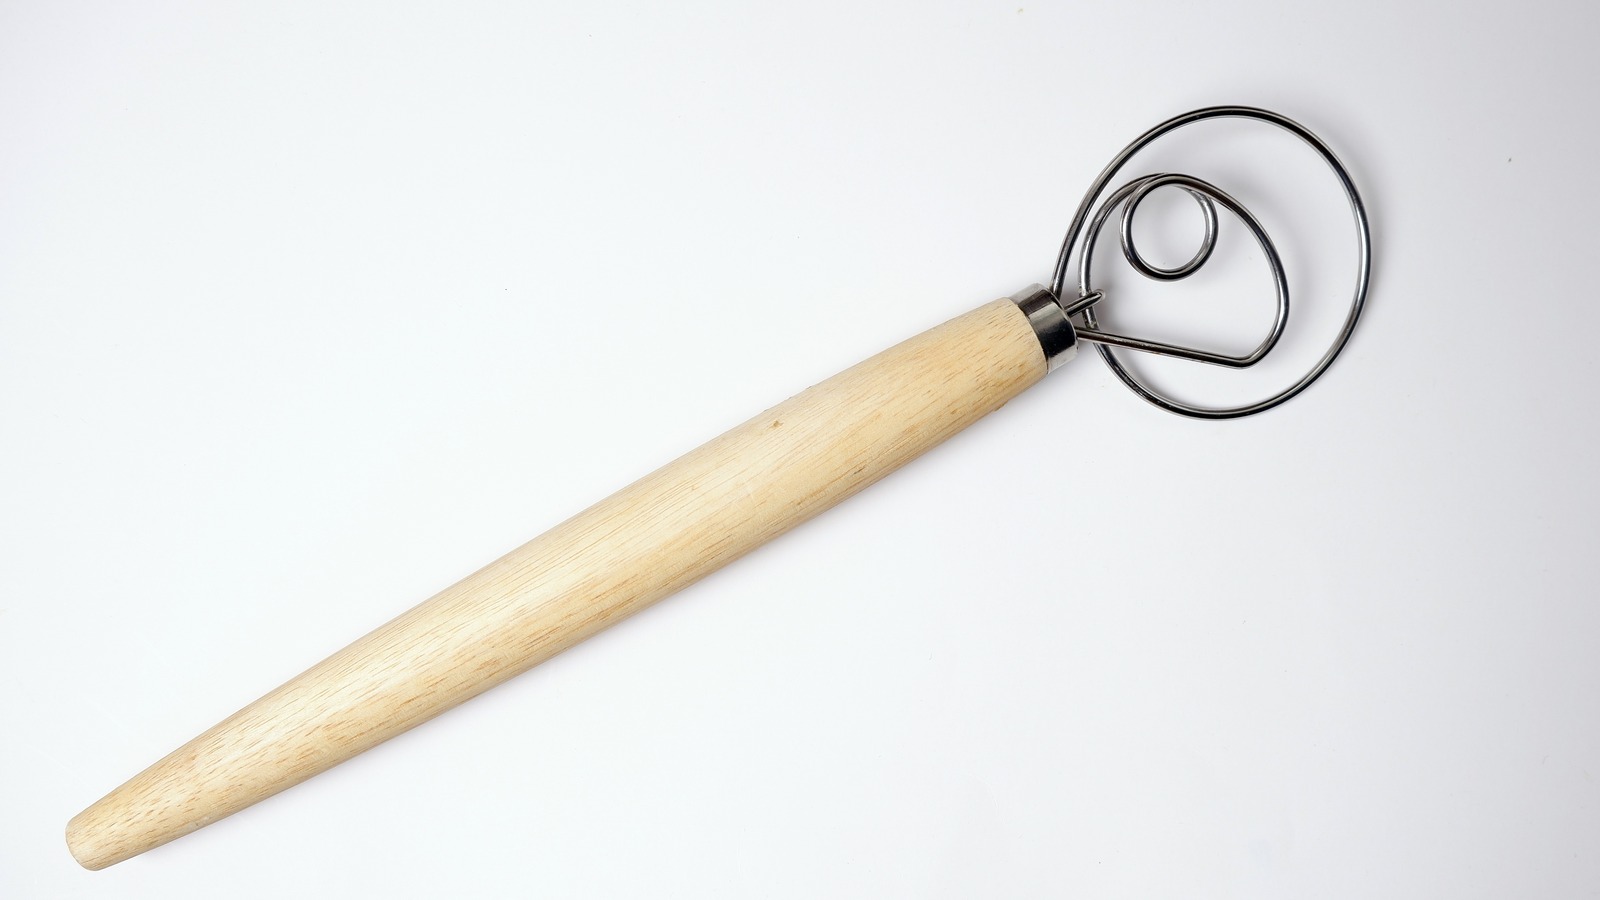 https://www.thedailymeal.com/img/gallery/what-do-you-use-a-danish-dough-whisk-for/l-intro-1671124542.jpg